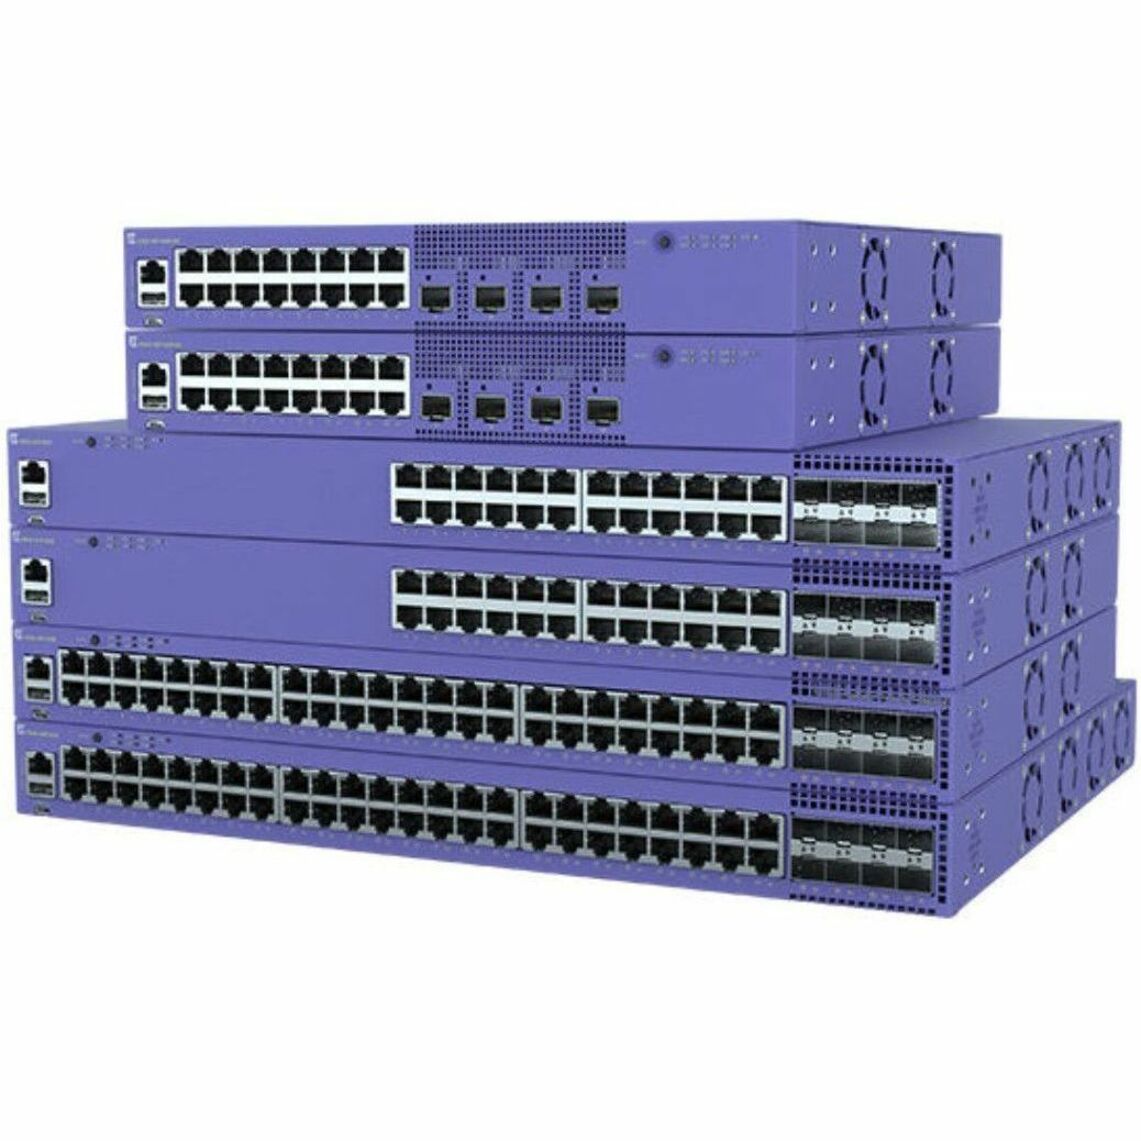 Extreme Networks 5320-24P-8XE ExtremeSwitching Ethernet Switch, 24 Gigabit Ethernet PoE+, 8 10 Gigabit Ethernet Expansion Slots